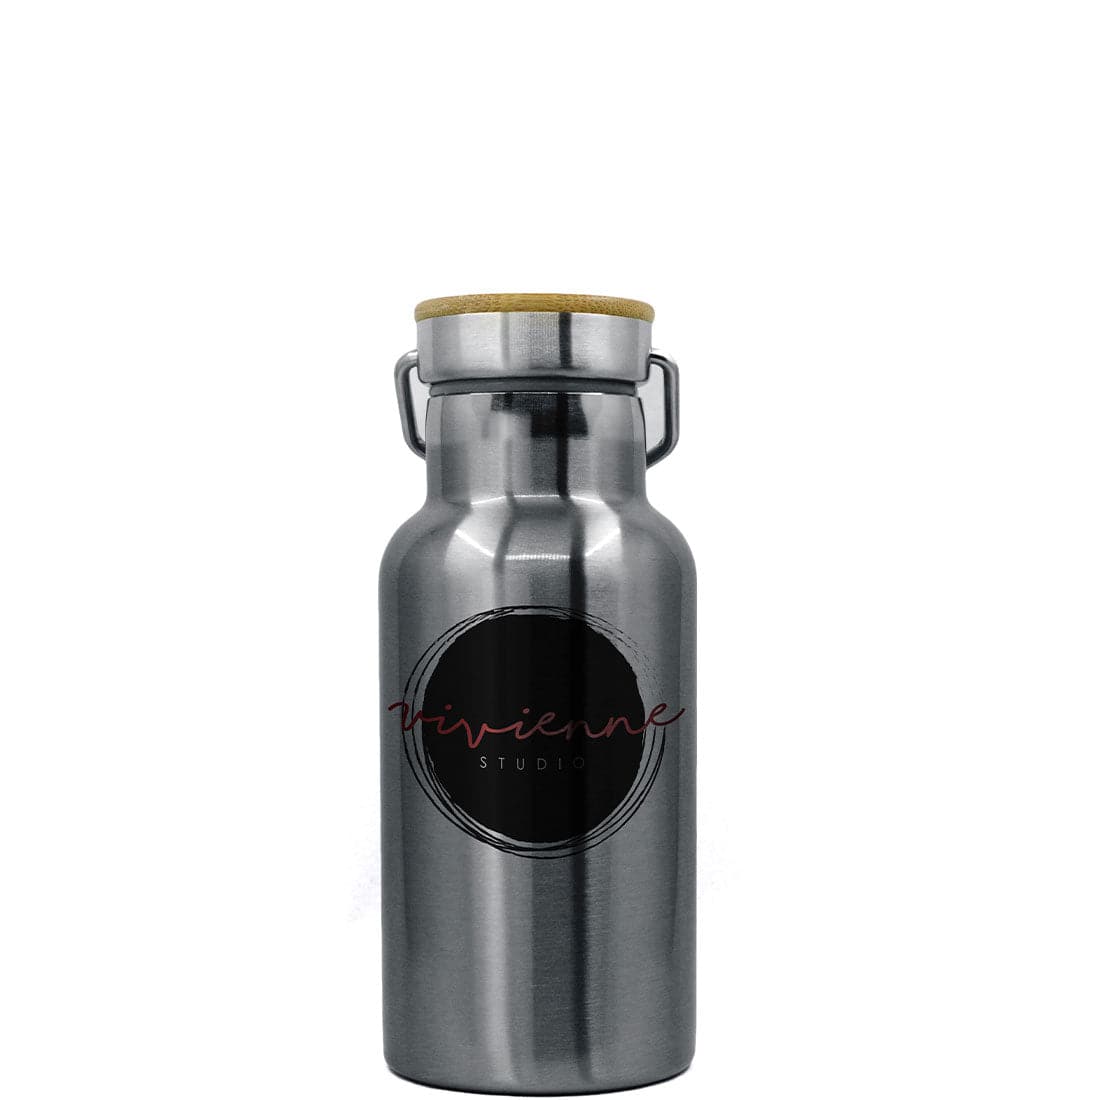 Pearl Coating™ Sublimation Water Bottle with Bamboo Lid - Pack of 5 - Joto Imaging Supplies US